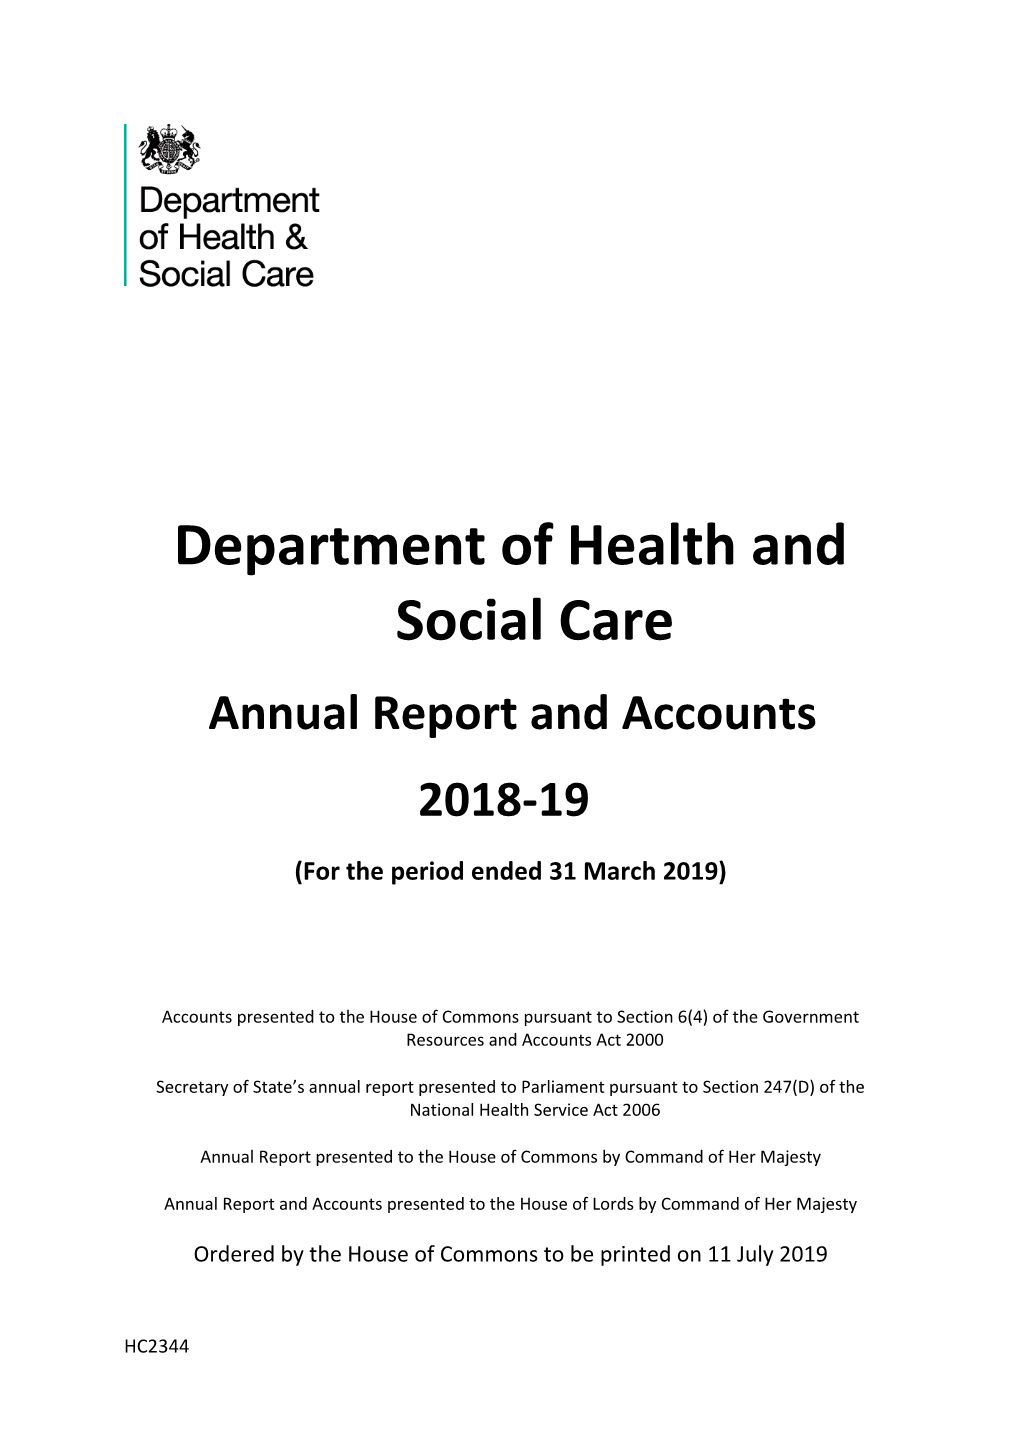 Department of Health and Social Care Annual Report and Accounts 2018-19